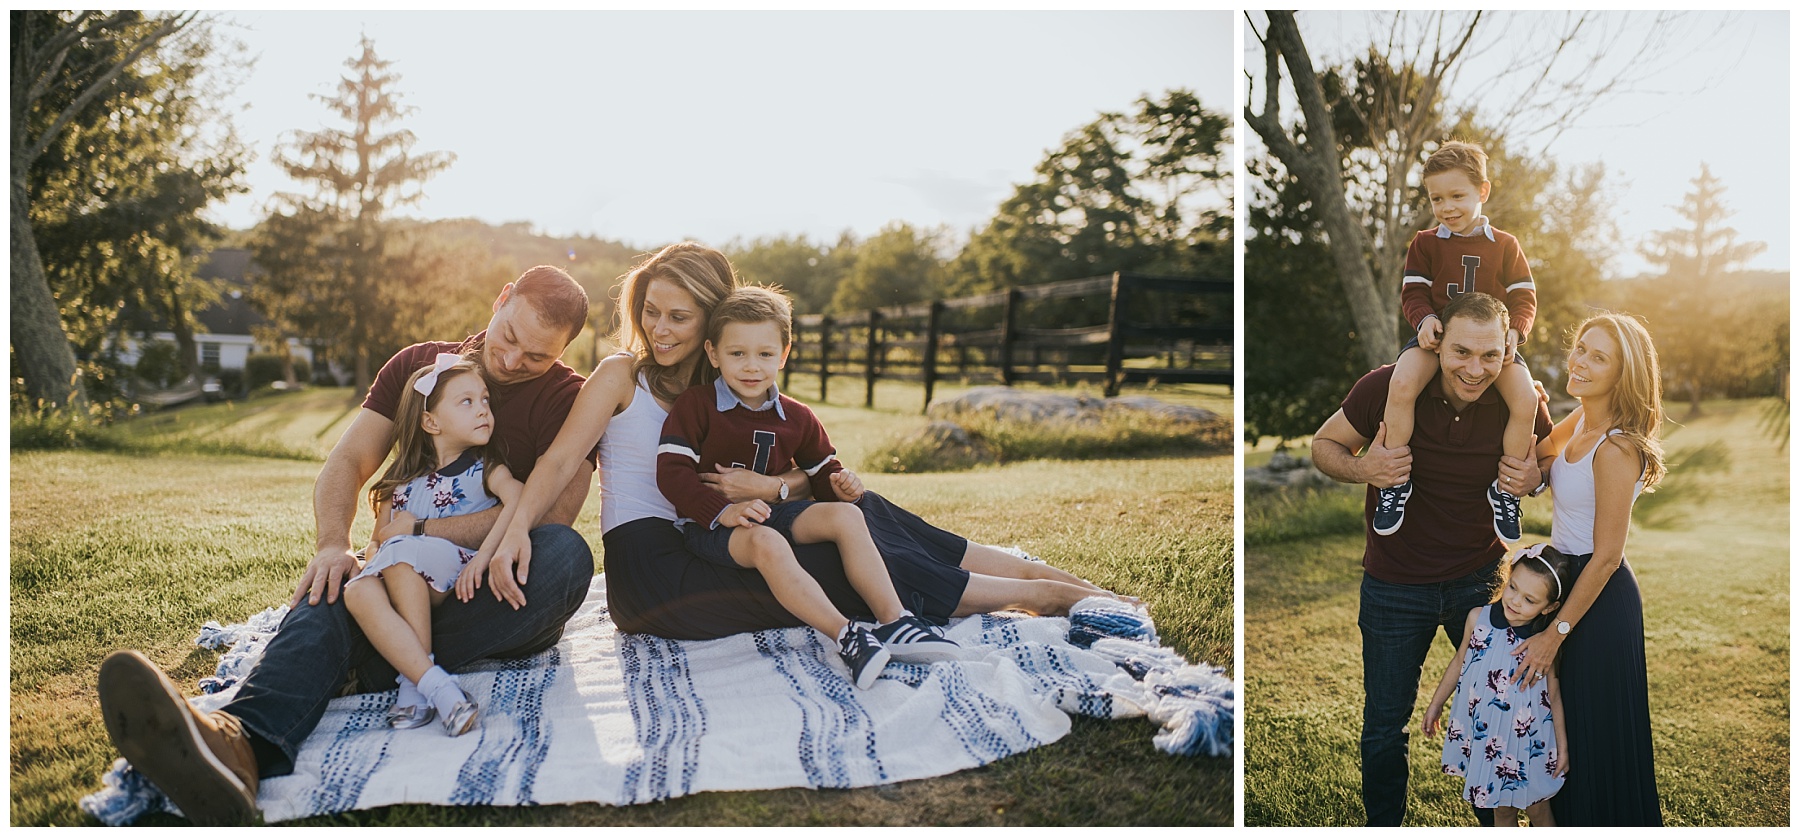 Family love in Fairfield County, Ct Kendra Conroy Photography